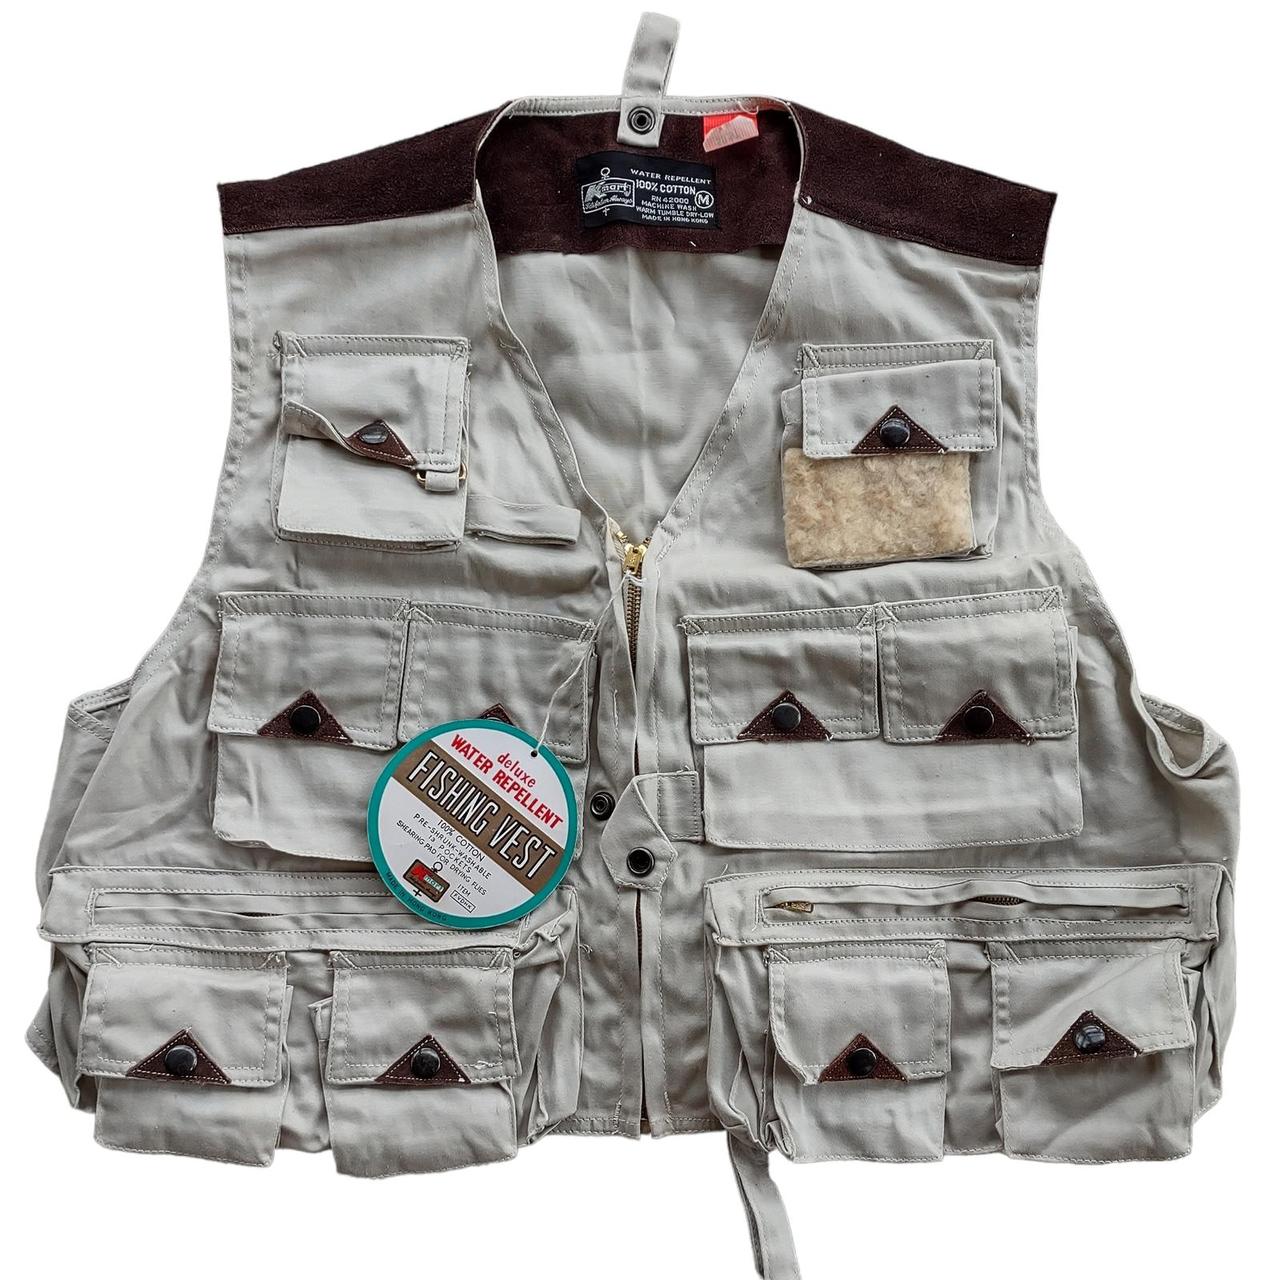 New with tags from Kmart vintage fishing vest with - Depop